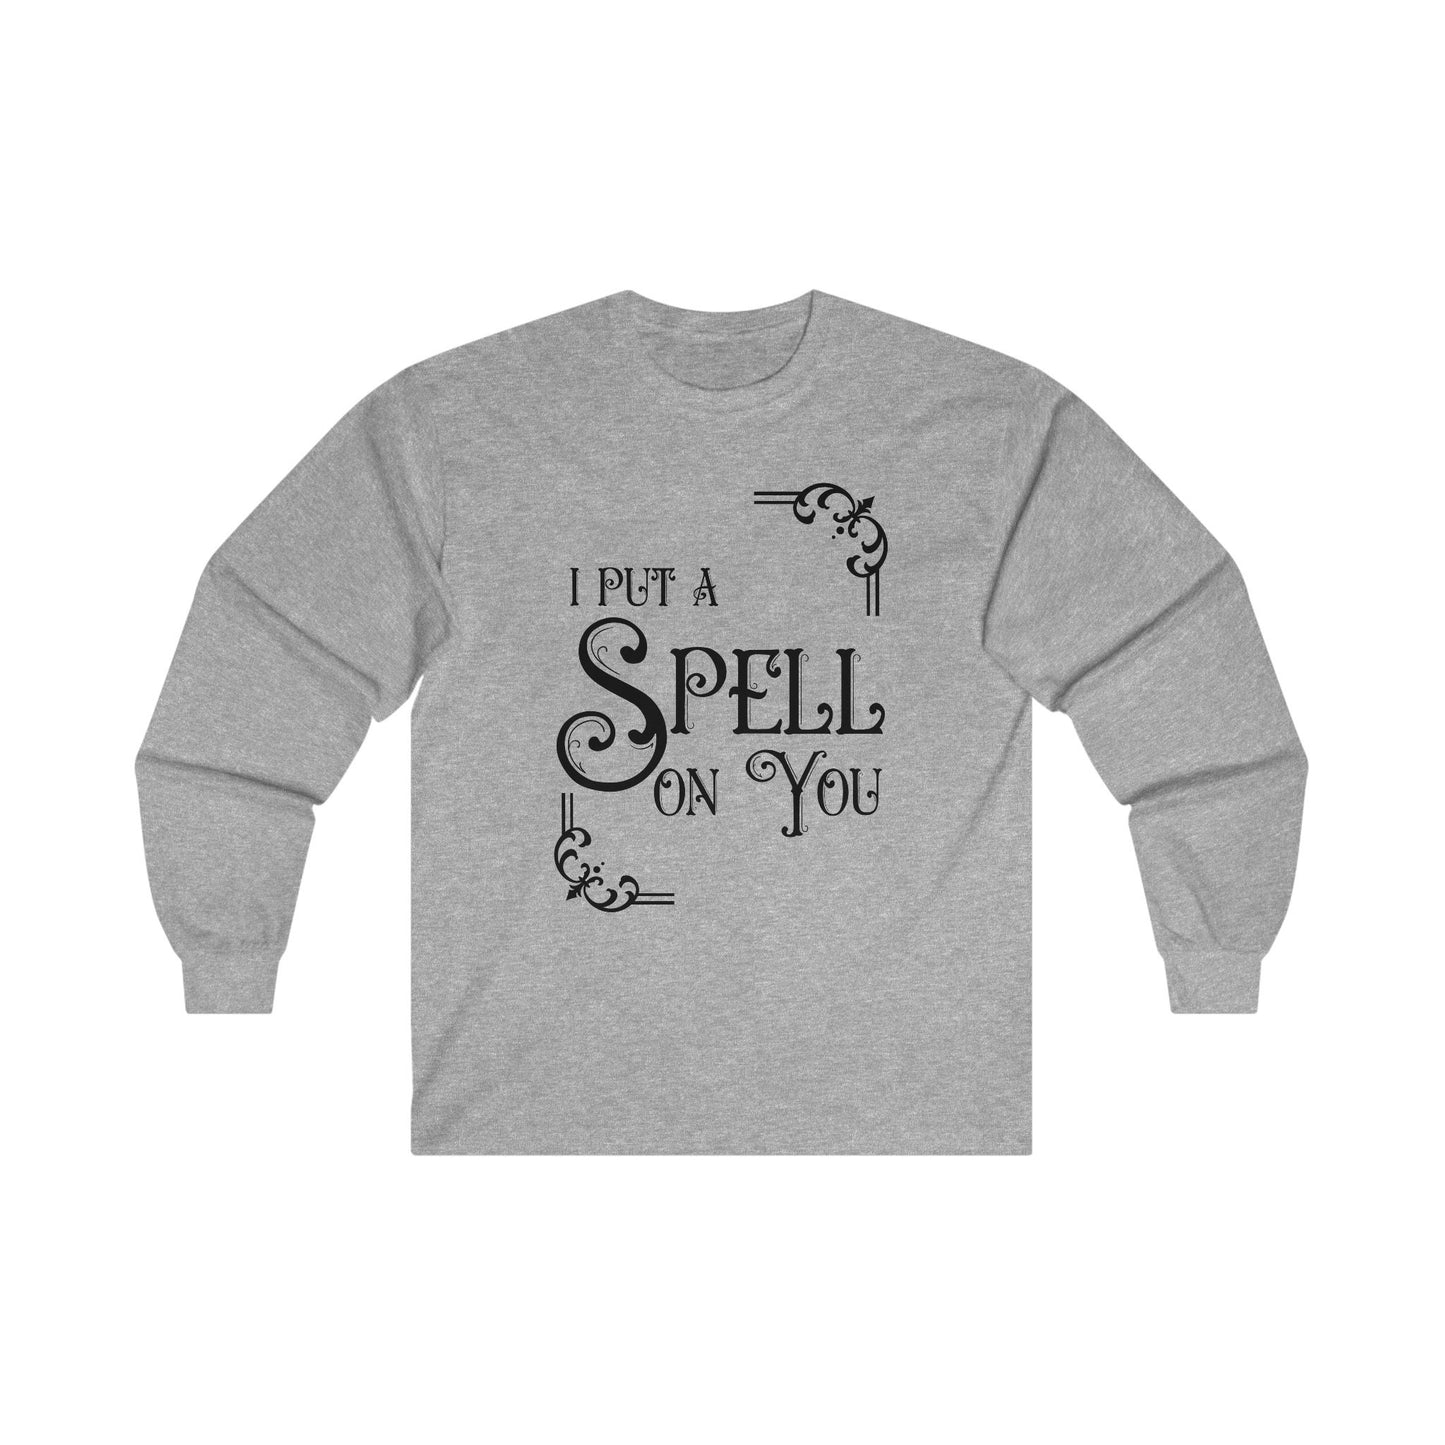 Halloween - I Put a Spell on You - Witches - Trick or Treat - Mystical - Vintage - Ultra Cotton Long Sleeve Tee